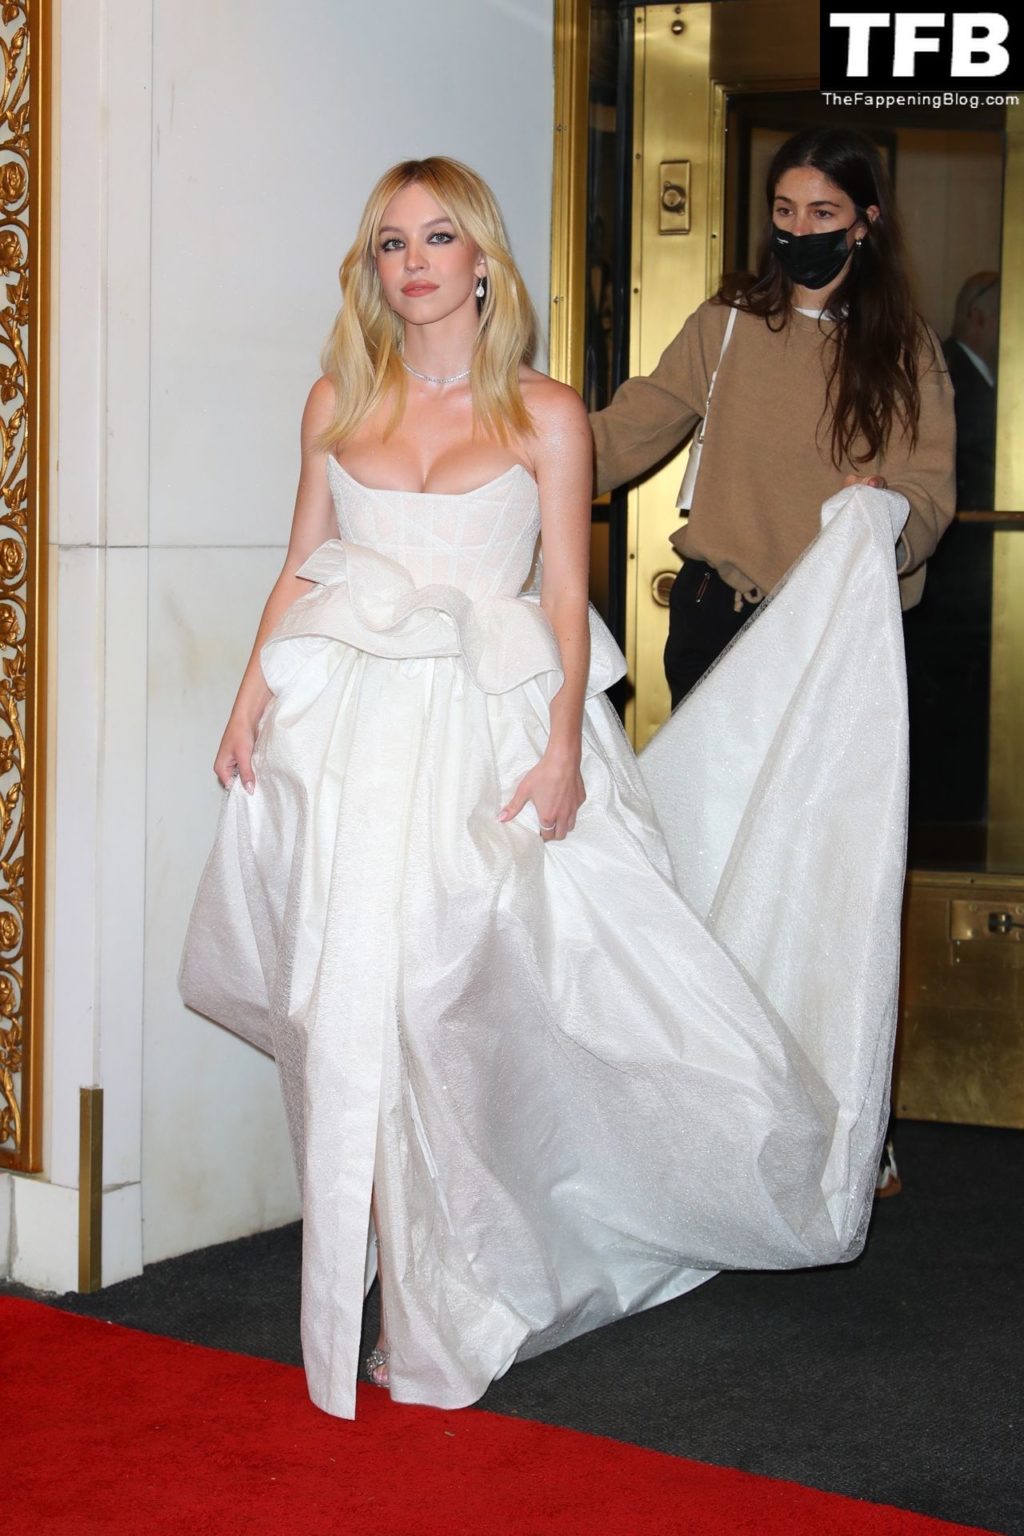 Sydney Sweeney Sexy The Fappening Blog 22 1024x1536 - Sydney Sweeney Looks Hot in White at The 2022 Met Gala in NYC (132 Photos)